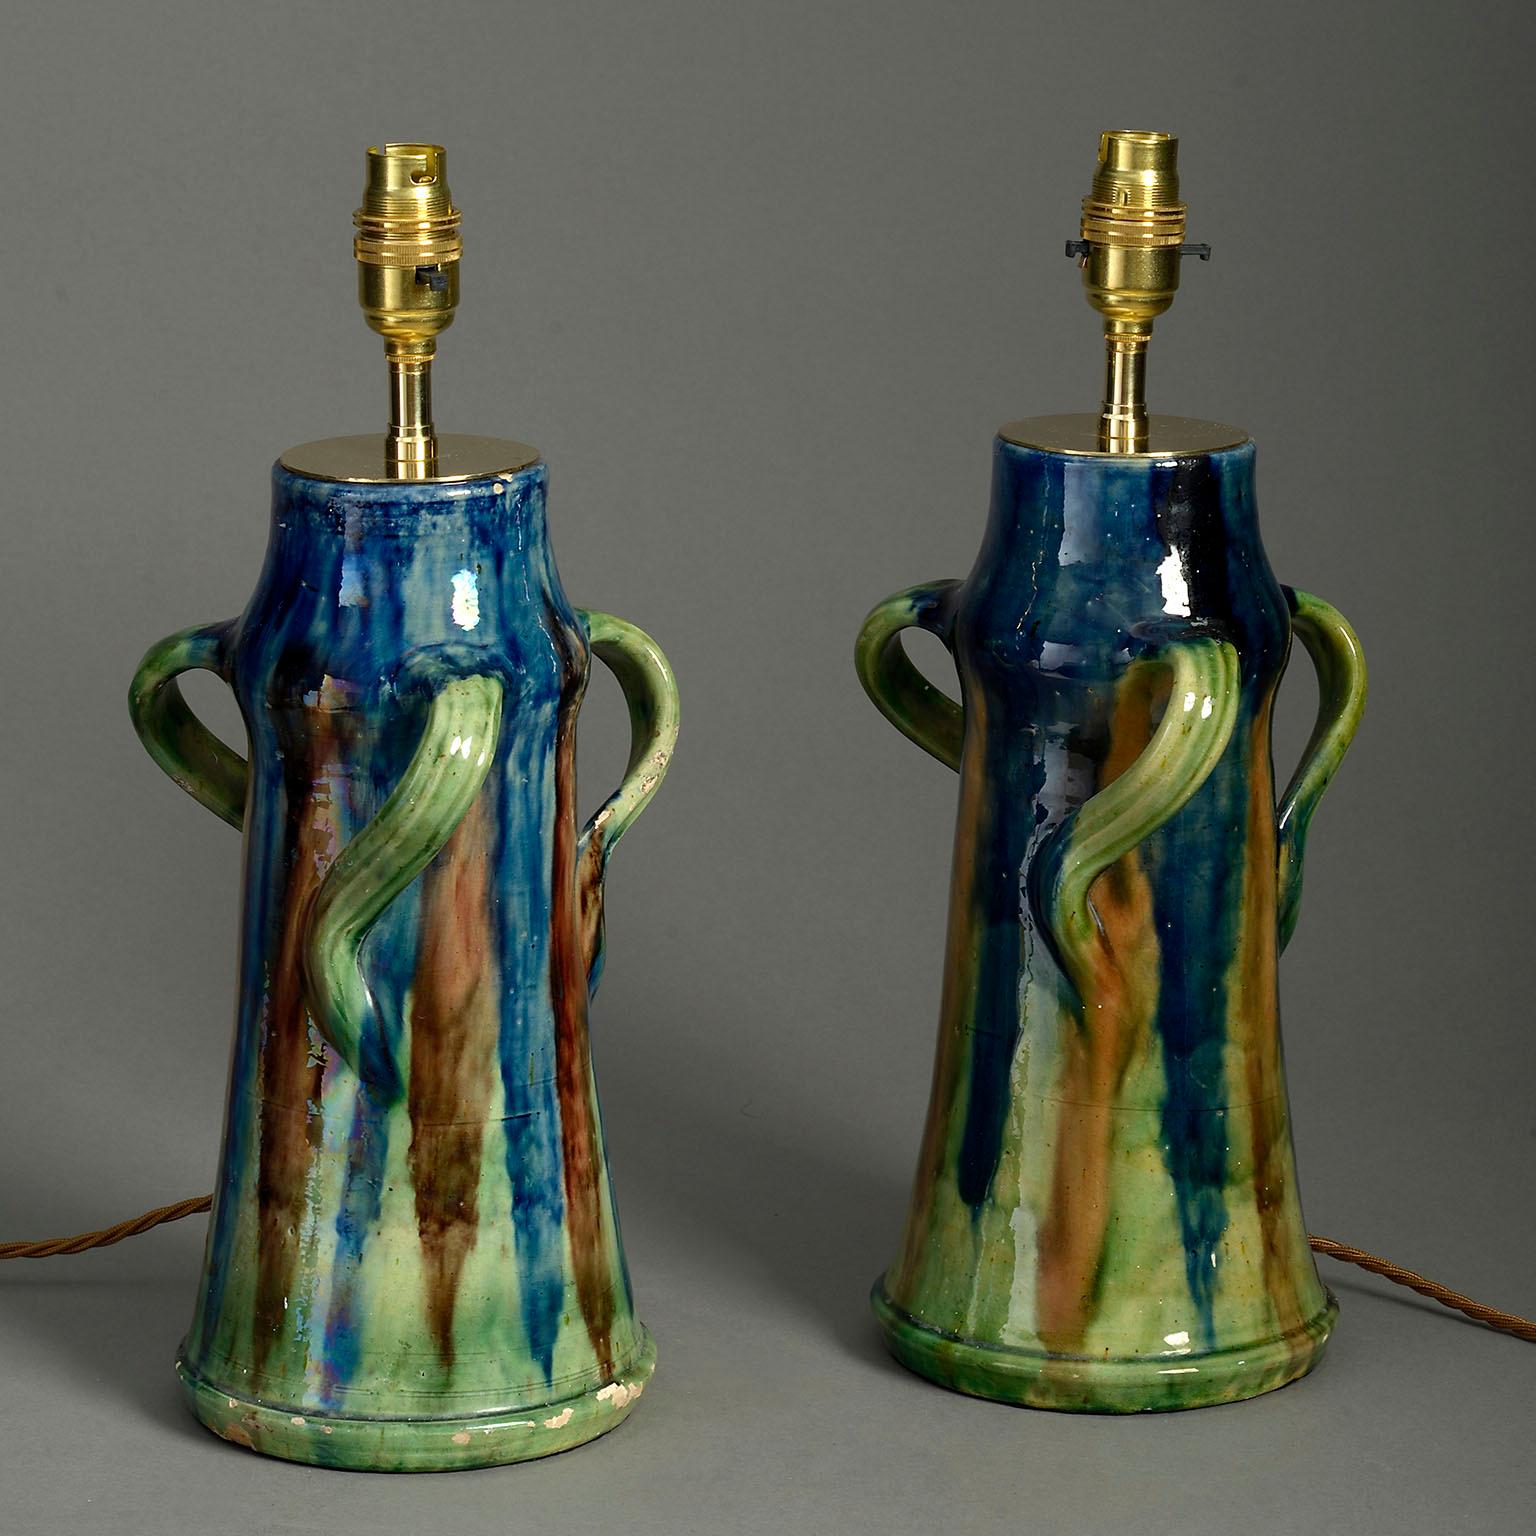 A pair of late nineteenth century iridescent polychrome glazed vases, each with three shapely handles and tapering conical bodies. Now mounted as table lamps.

Wired to UK standards but can be rewired for any international specification.